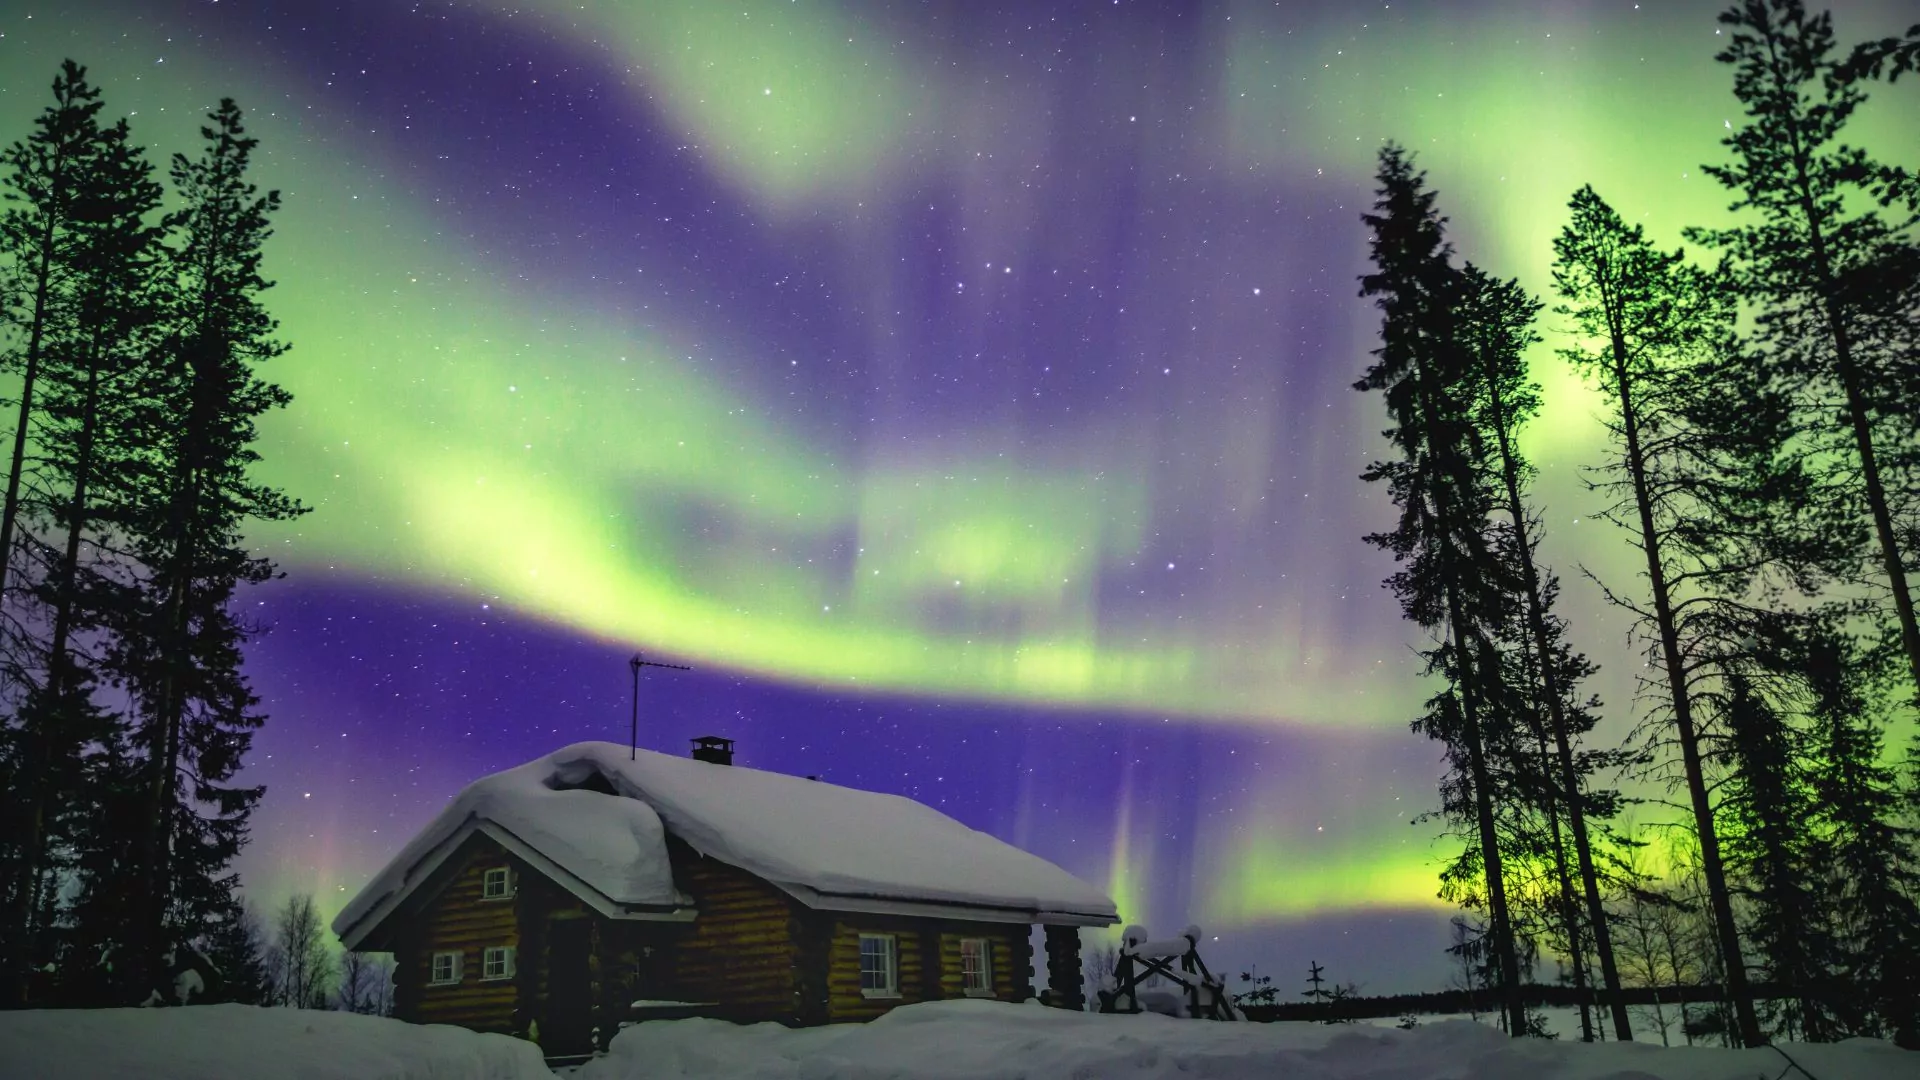 Northern lights display over snowy farm scene in Finland